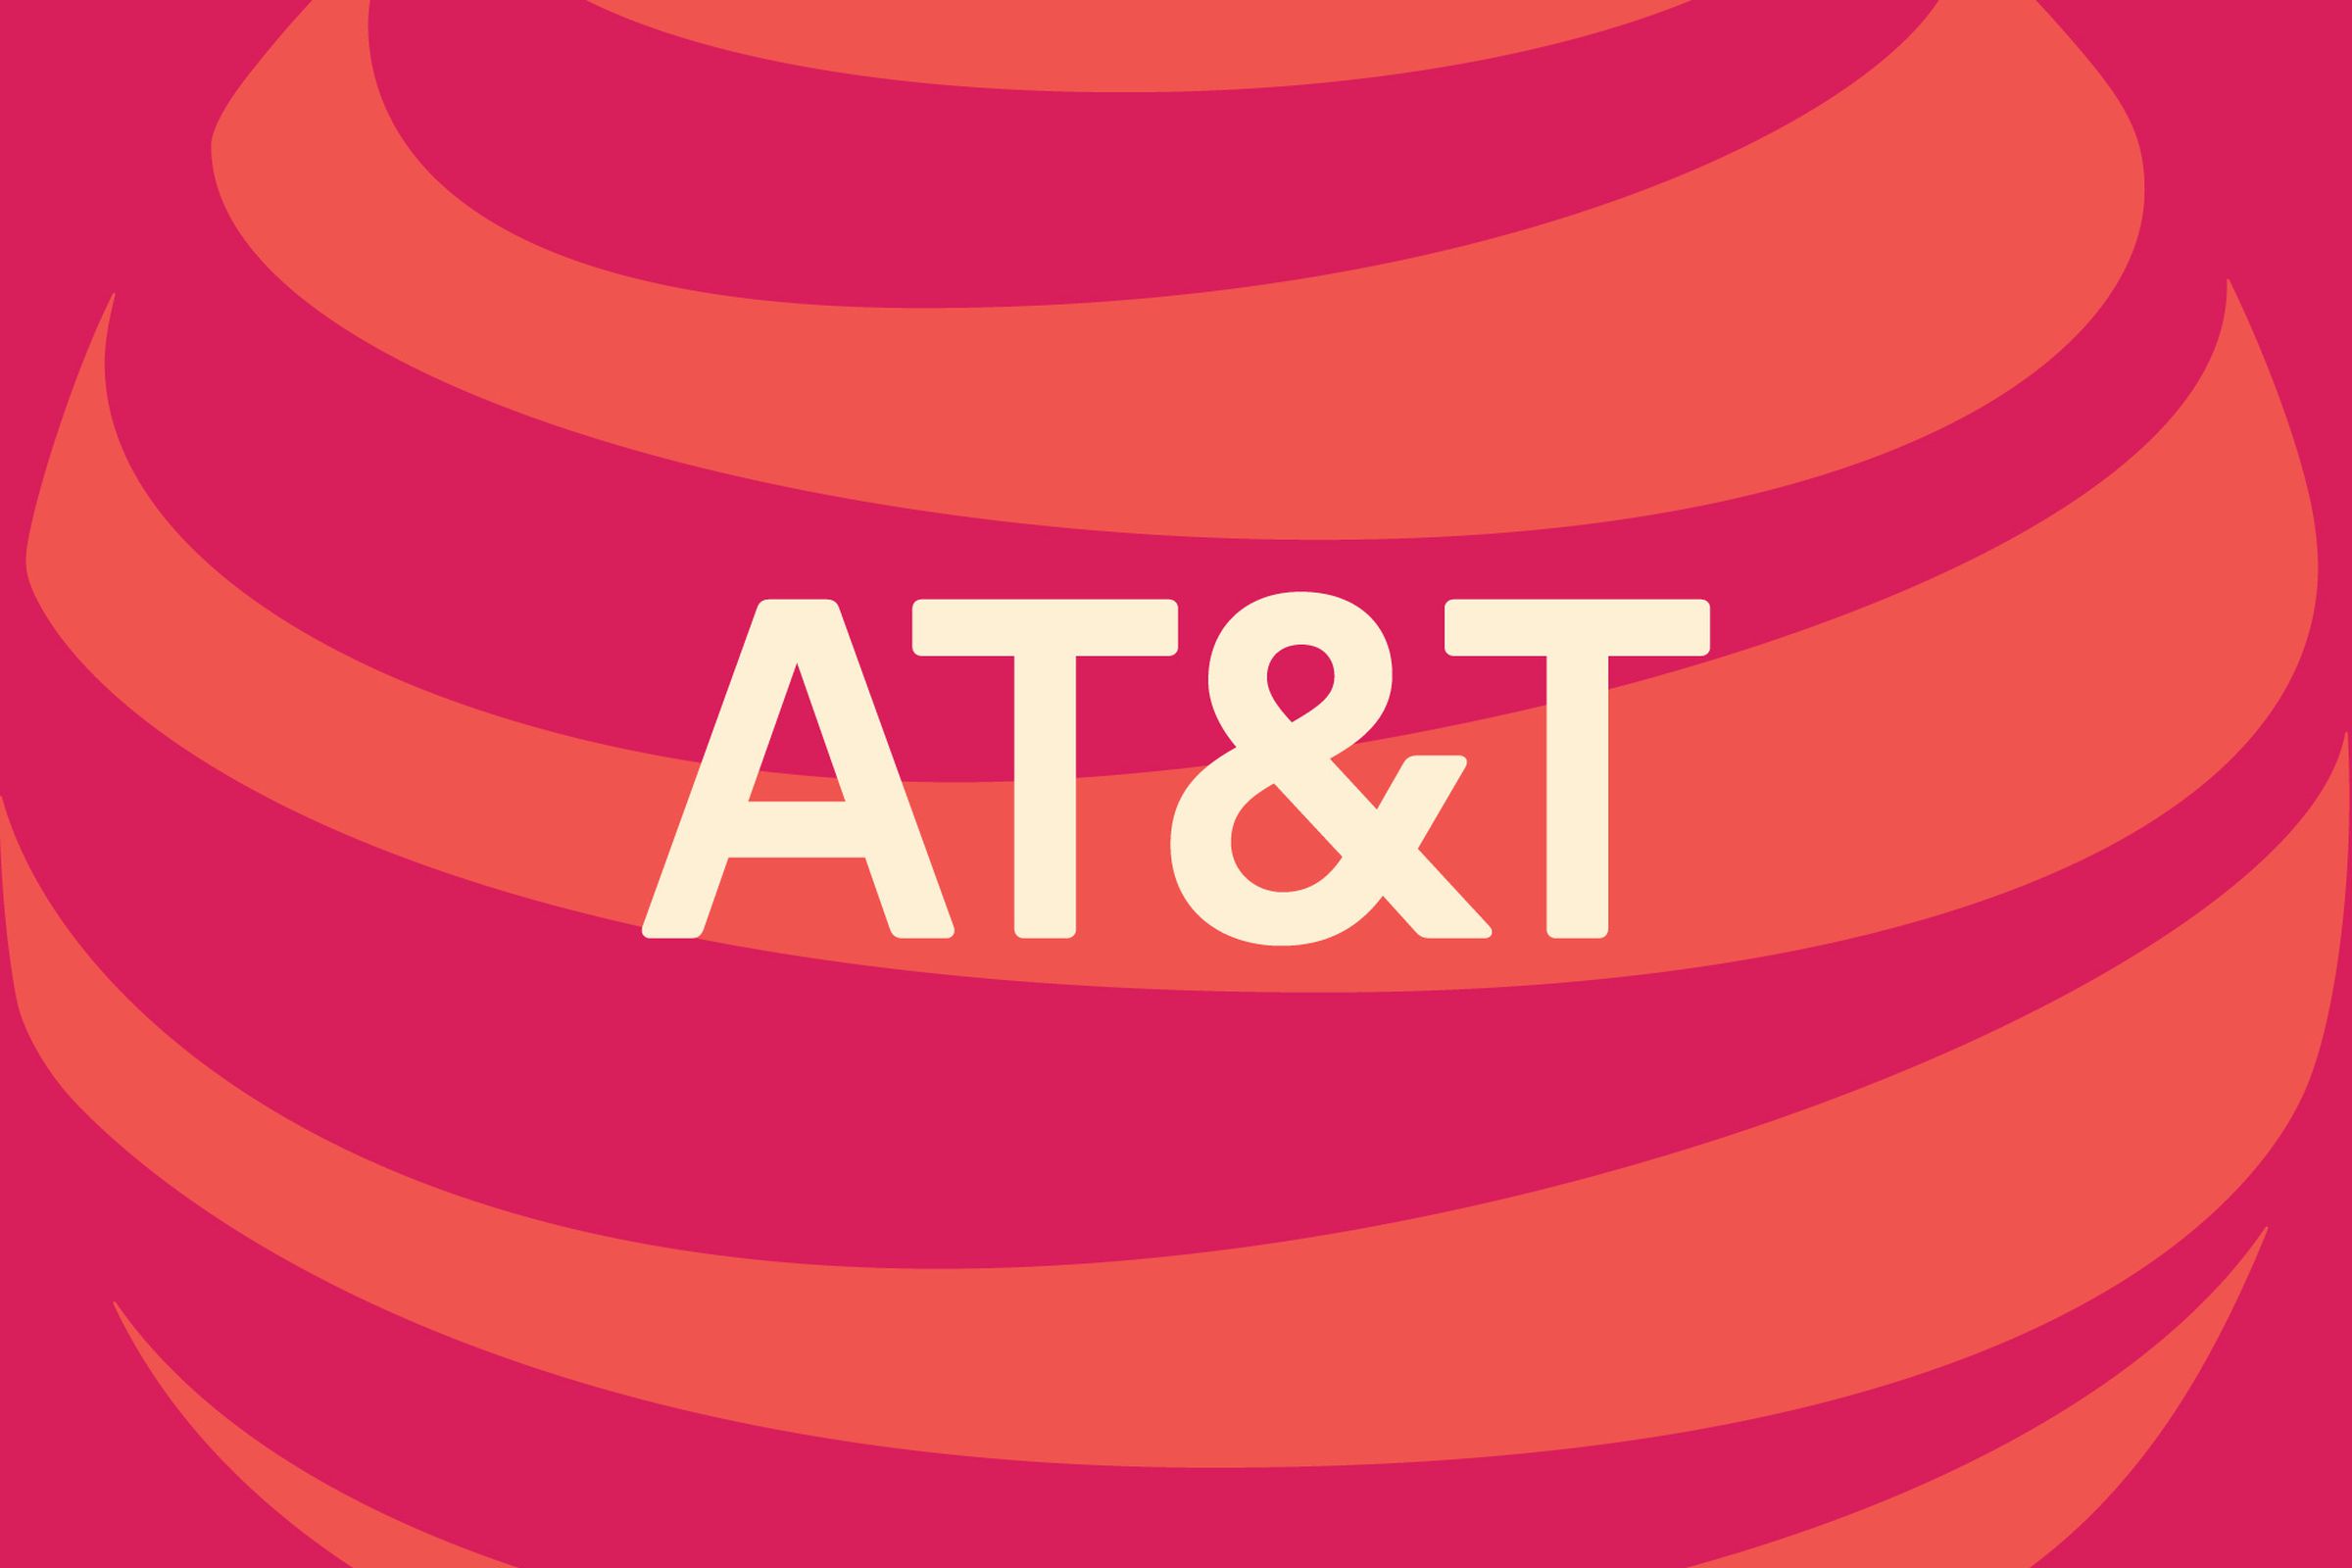 AT&amp;T logo with an illustrated red and orange background.